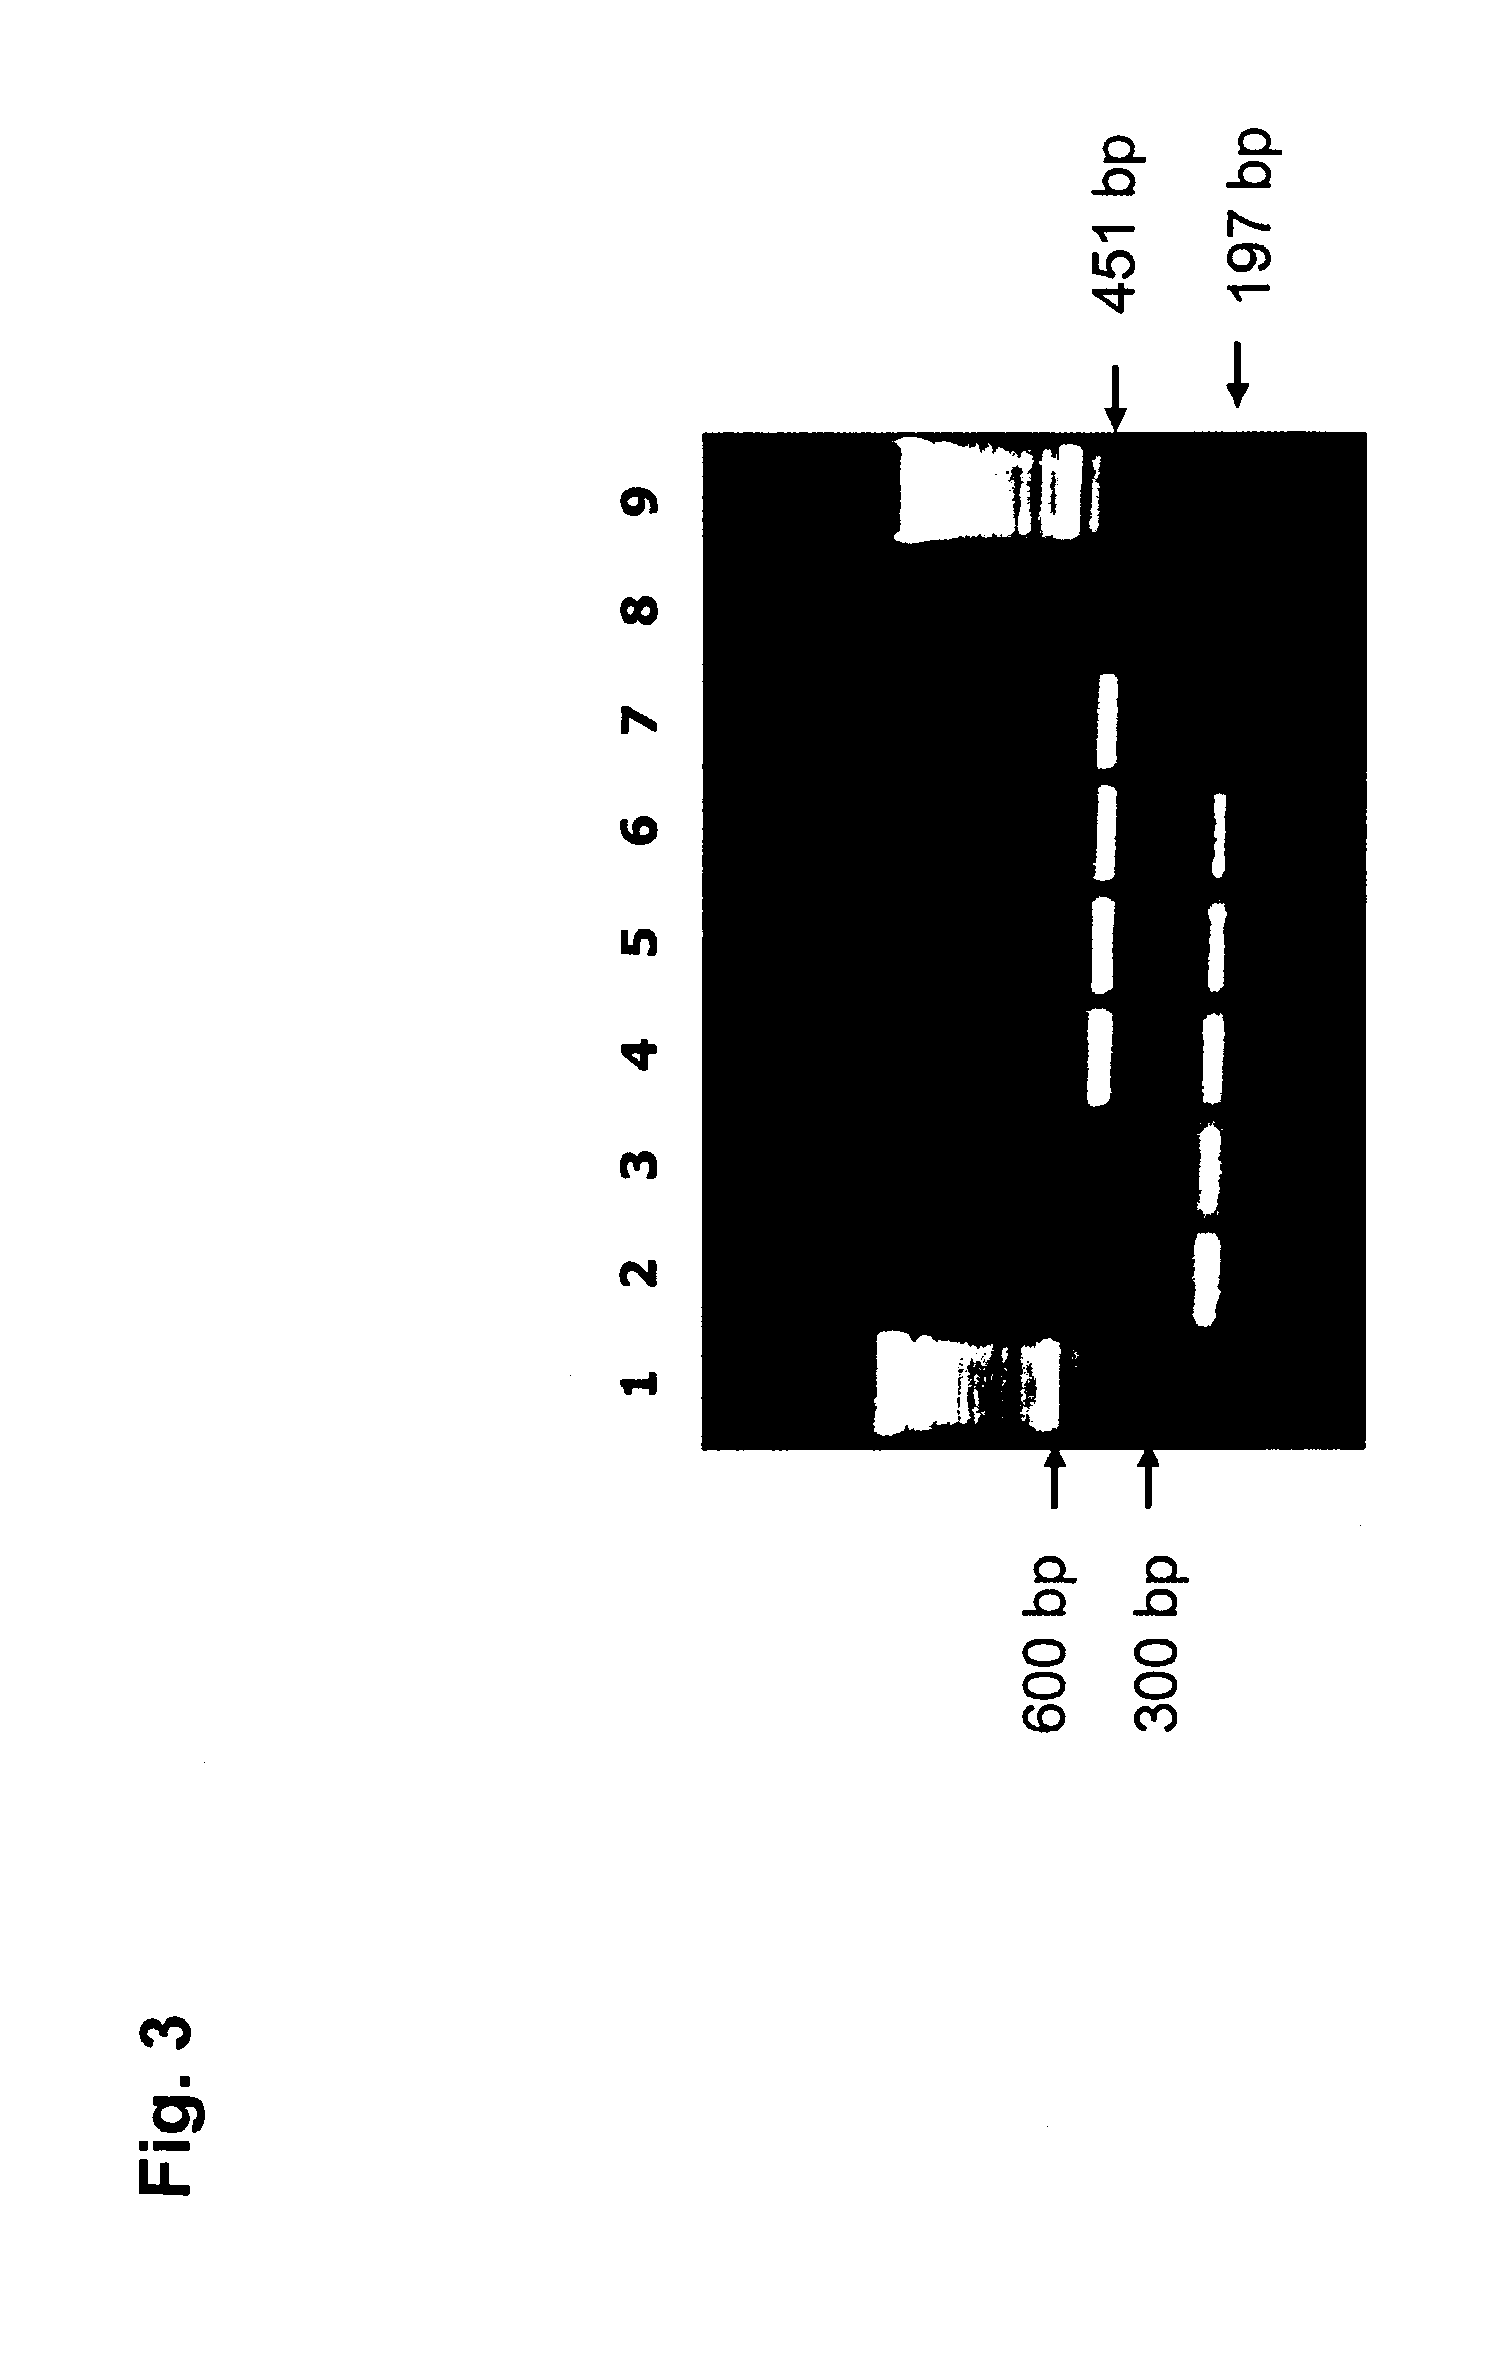 Insect resistant cotton plants and methods for identifying same